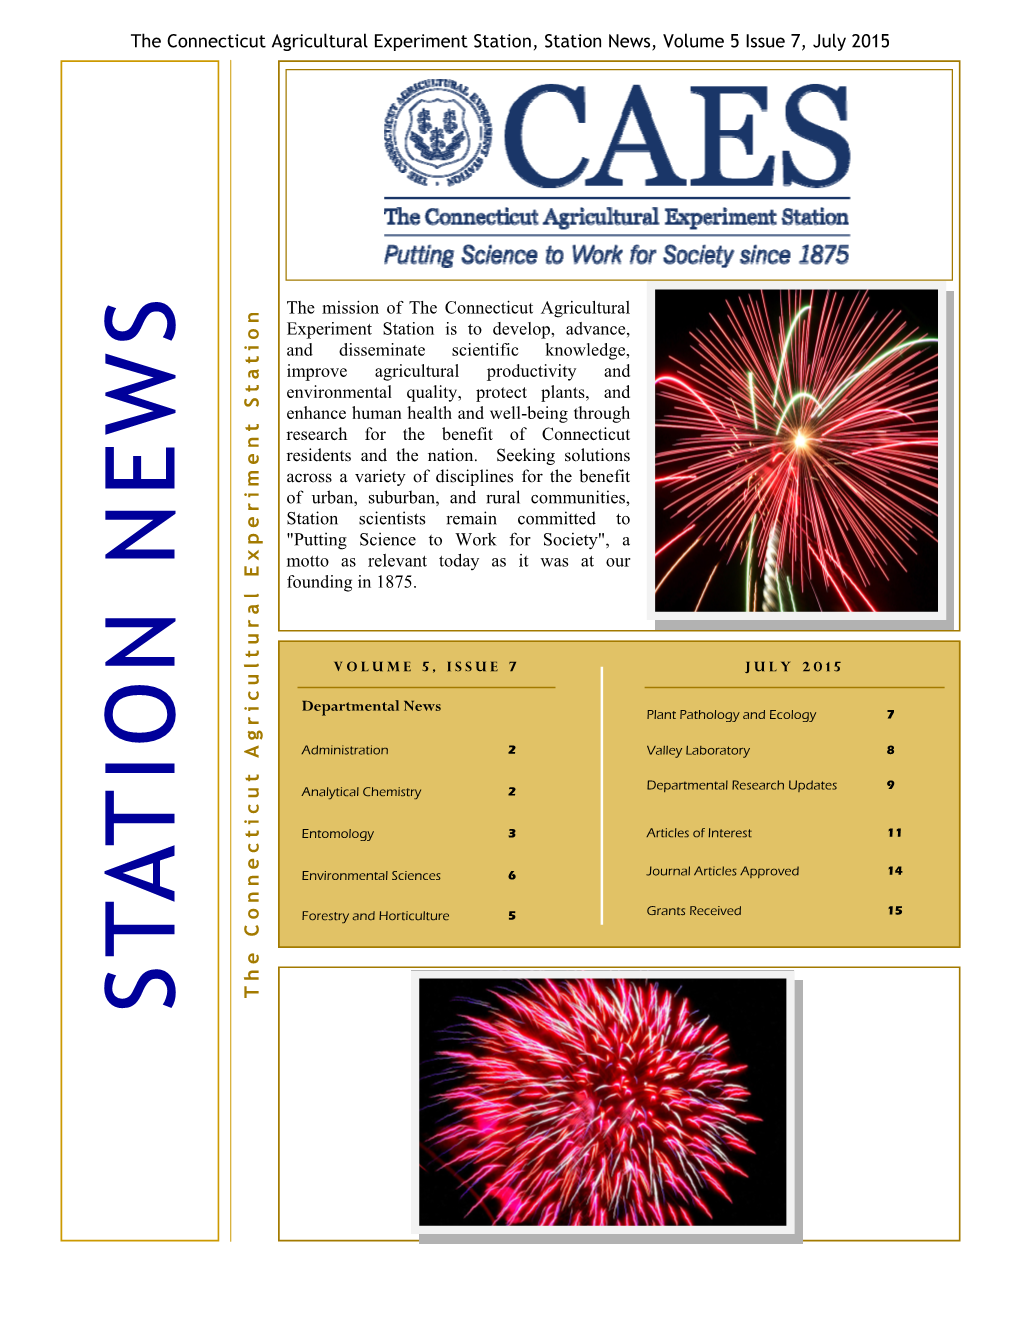 CAES Station News July 2015